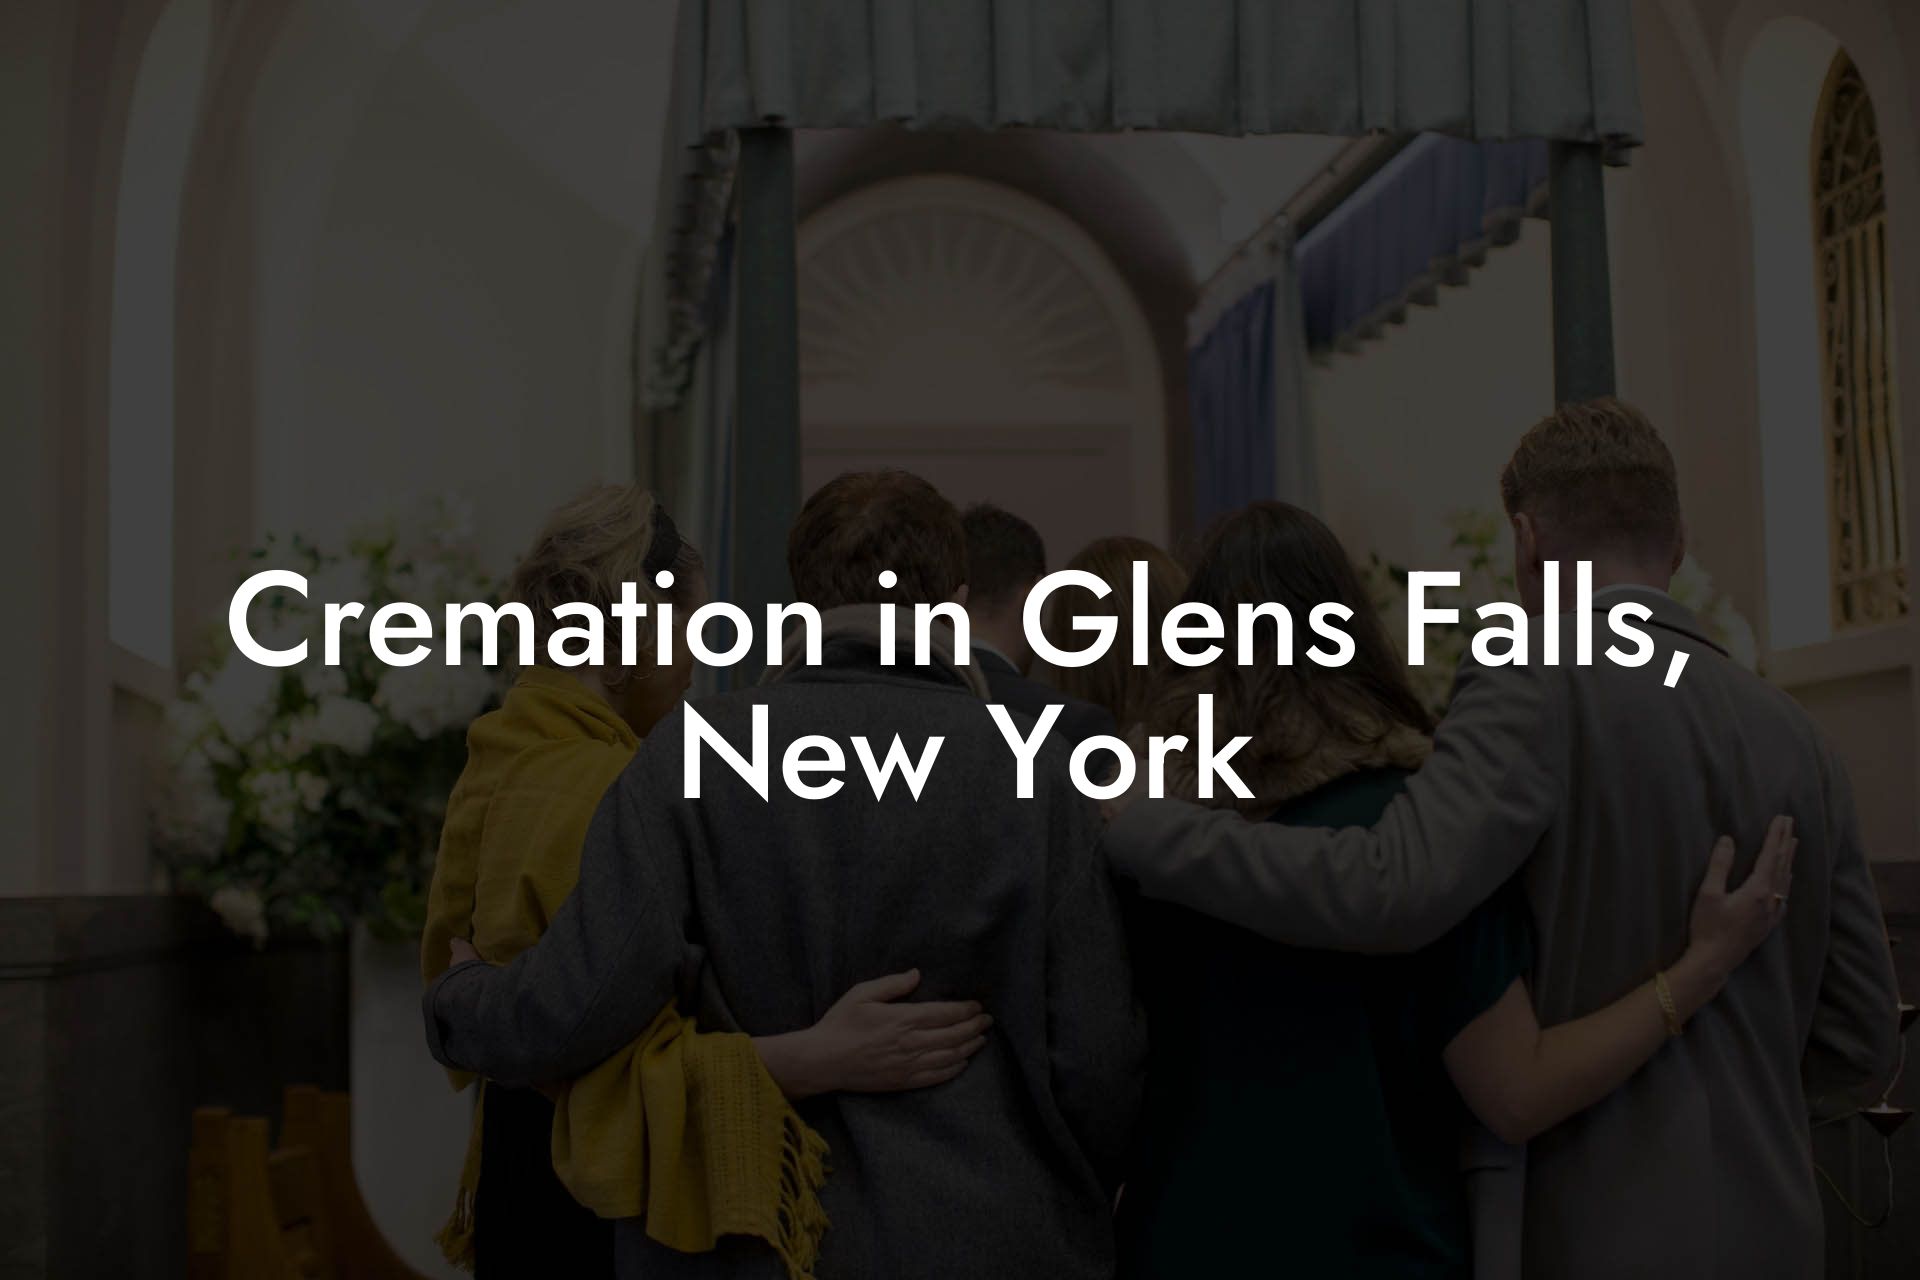 Cremation in Glens Falls, New York